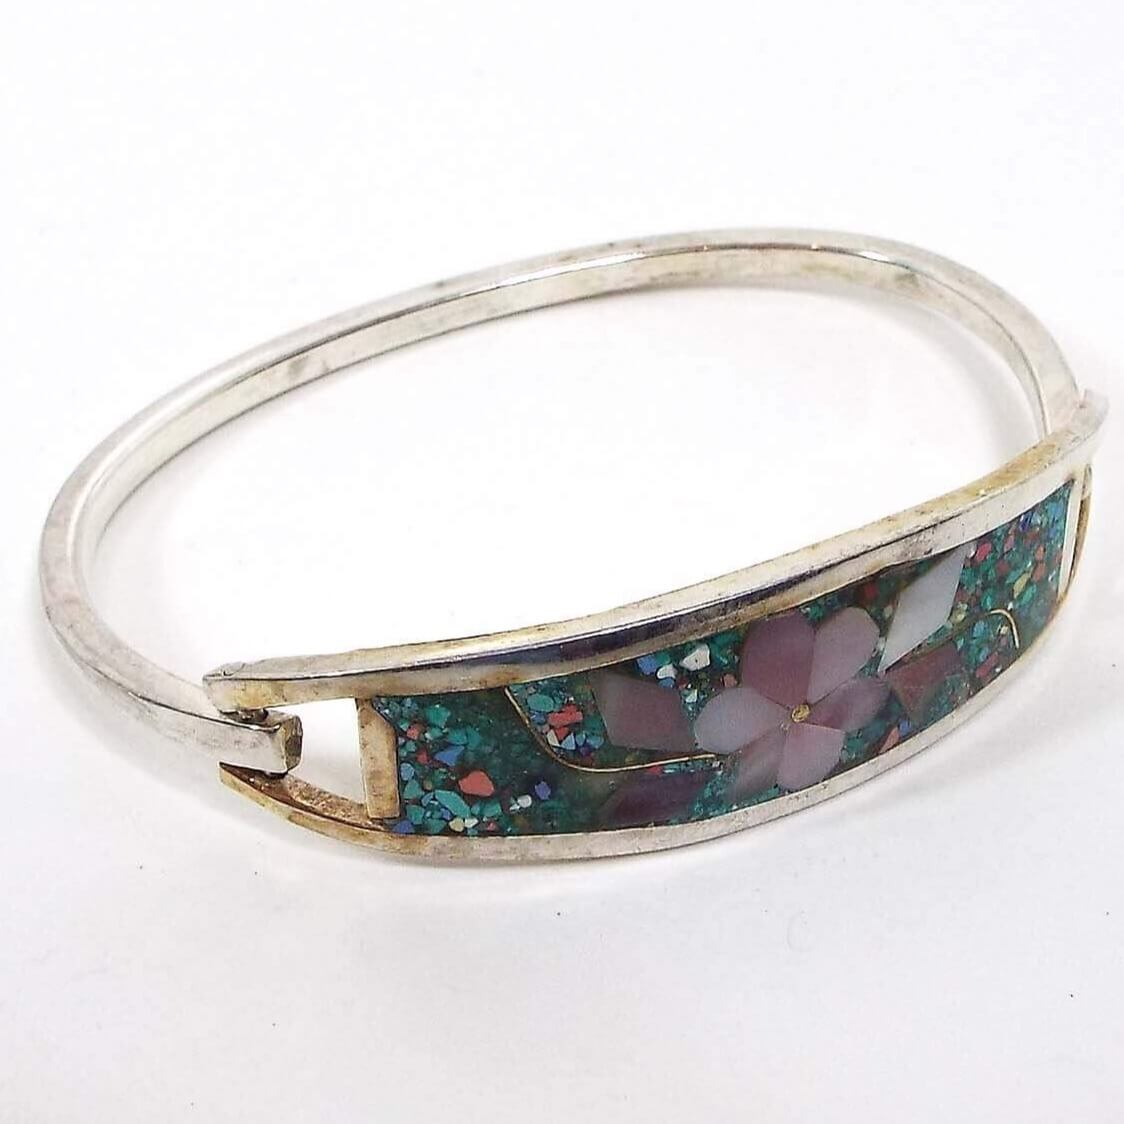 Angled view of the retro vintage Taxco hinged bangle bracelet. The metal is slightly darkened silver tone color from age. The front part has a dyed pink inlaid mother of pearl shell flower design. The rest of the front is filled in with teal green resin and multi color stone chips.